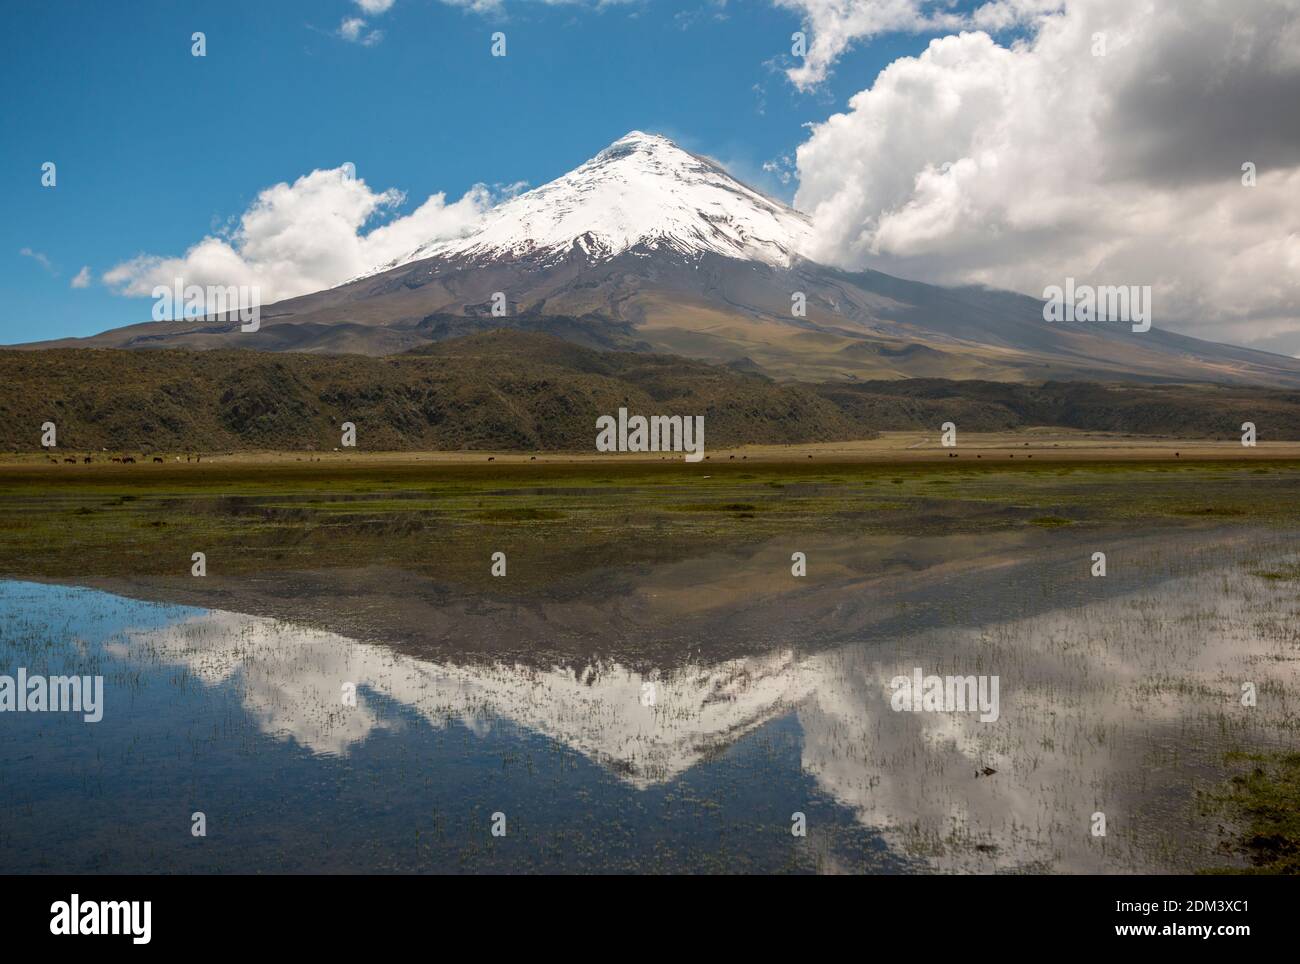 The snowcapped Cotopaxi Volcano reflected in a lake  (Laguna Limpiopungo). Cotopaxi National Park in the Ecuadorian Andes. Stock Photo